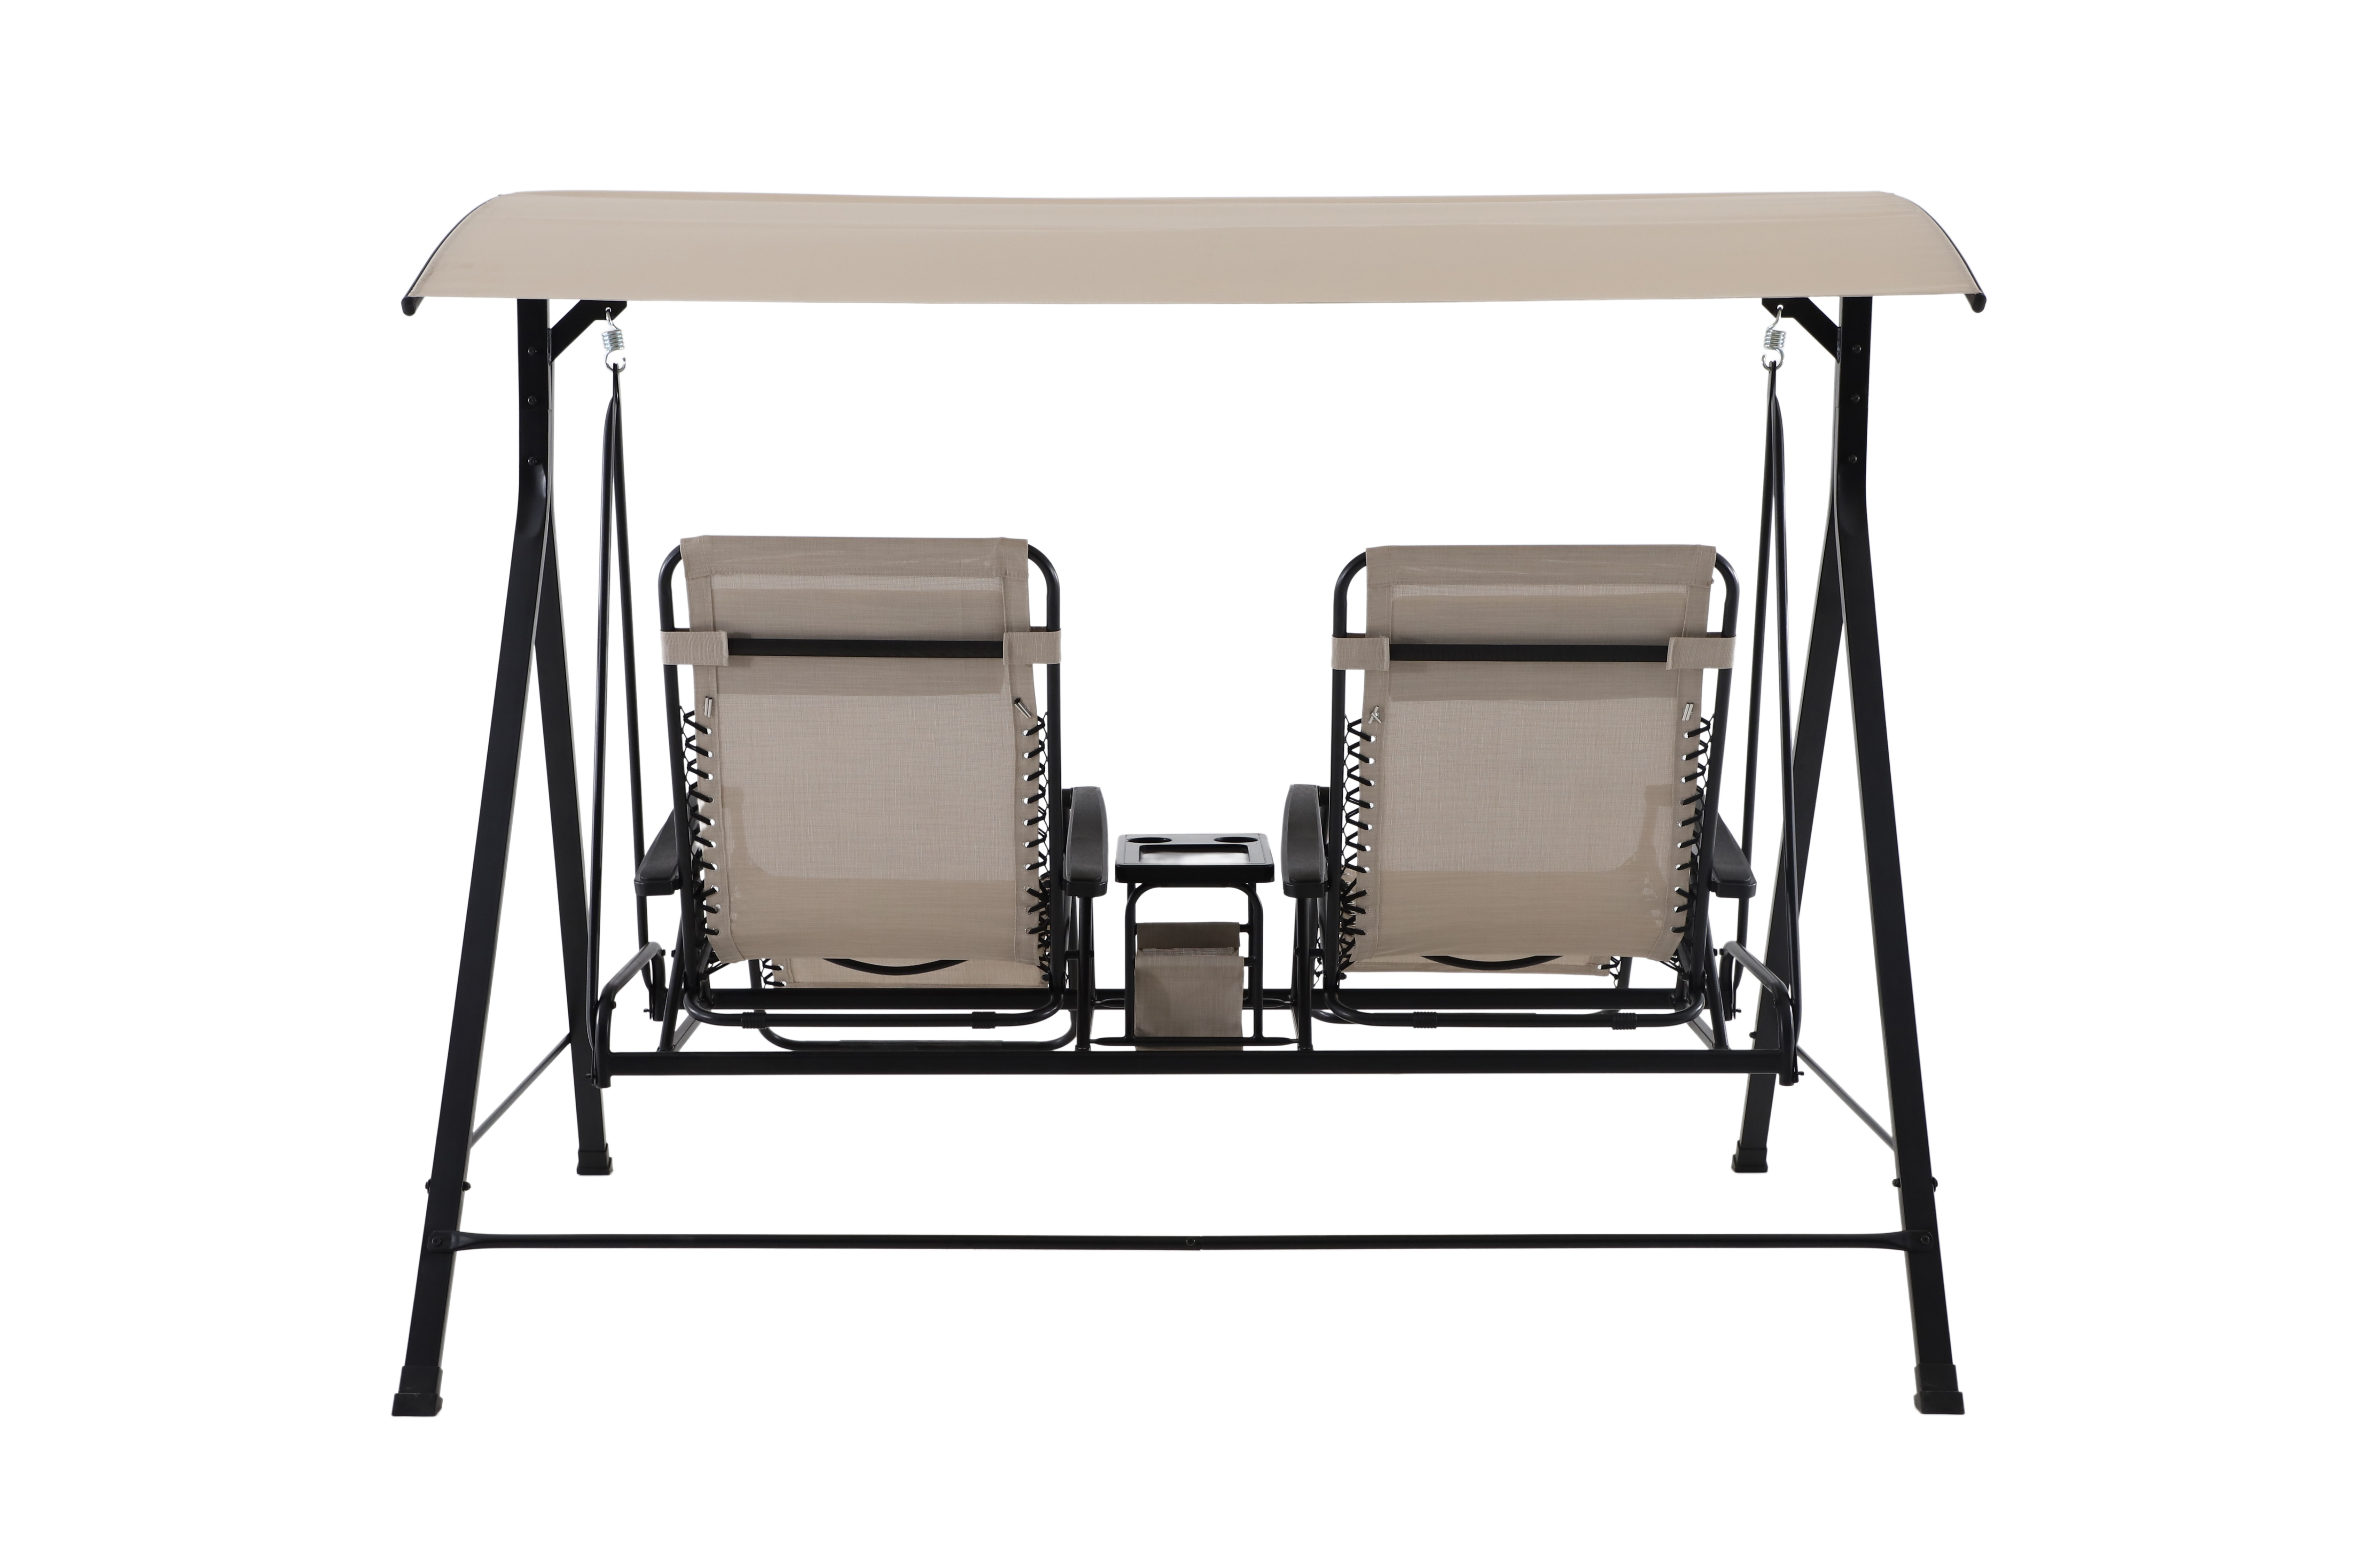 Mainstays 2-Seat Reclining Oversized Zero-Gravity Swing with Canopy and Center Storage Console, Beige/Black - image 2 of 9